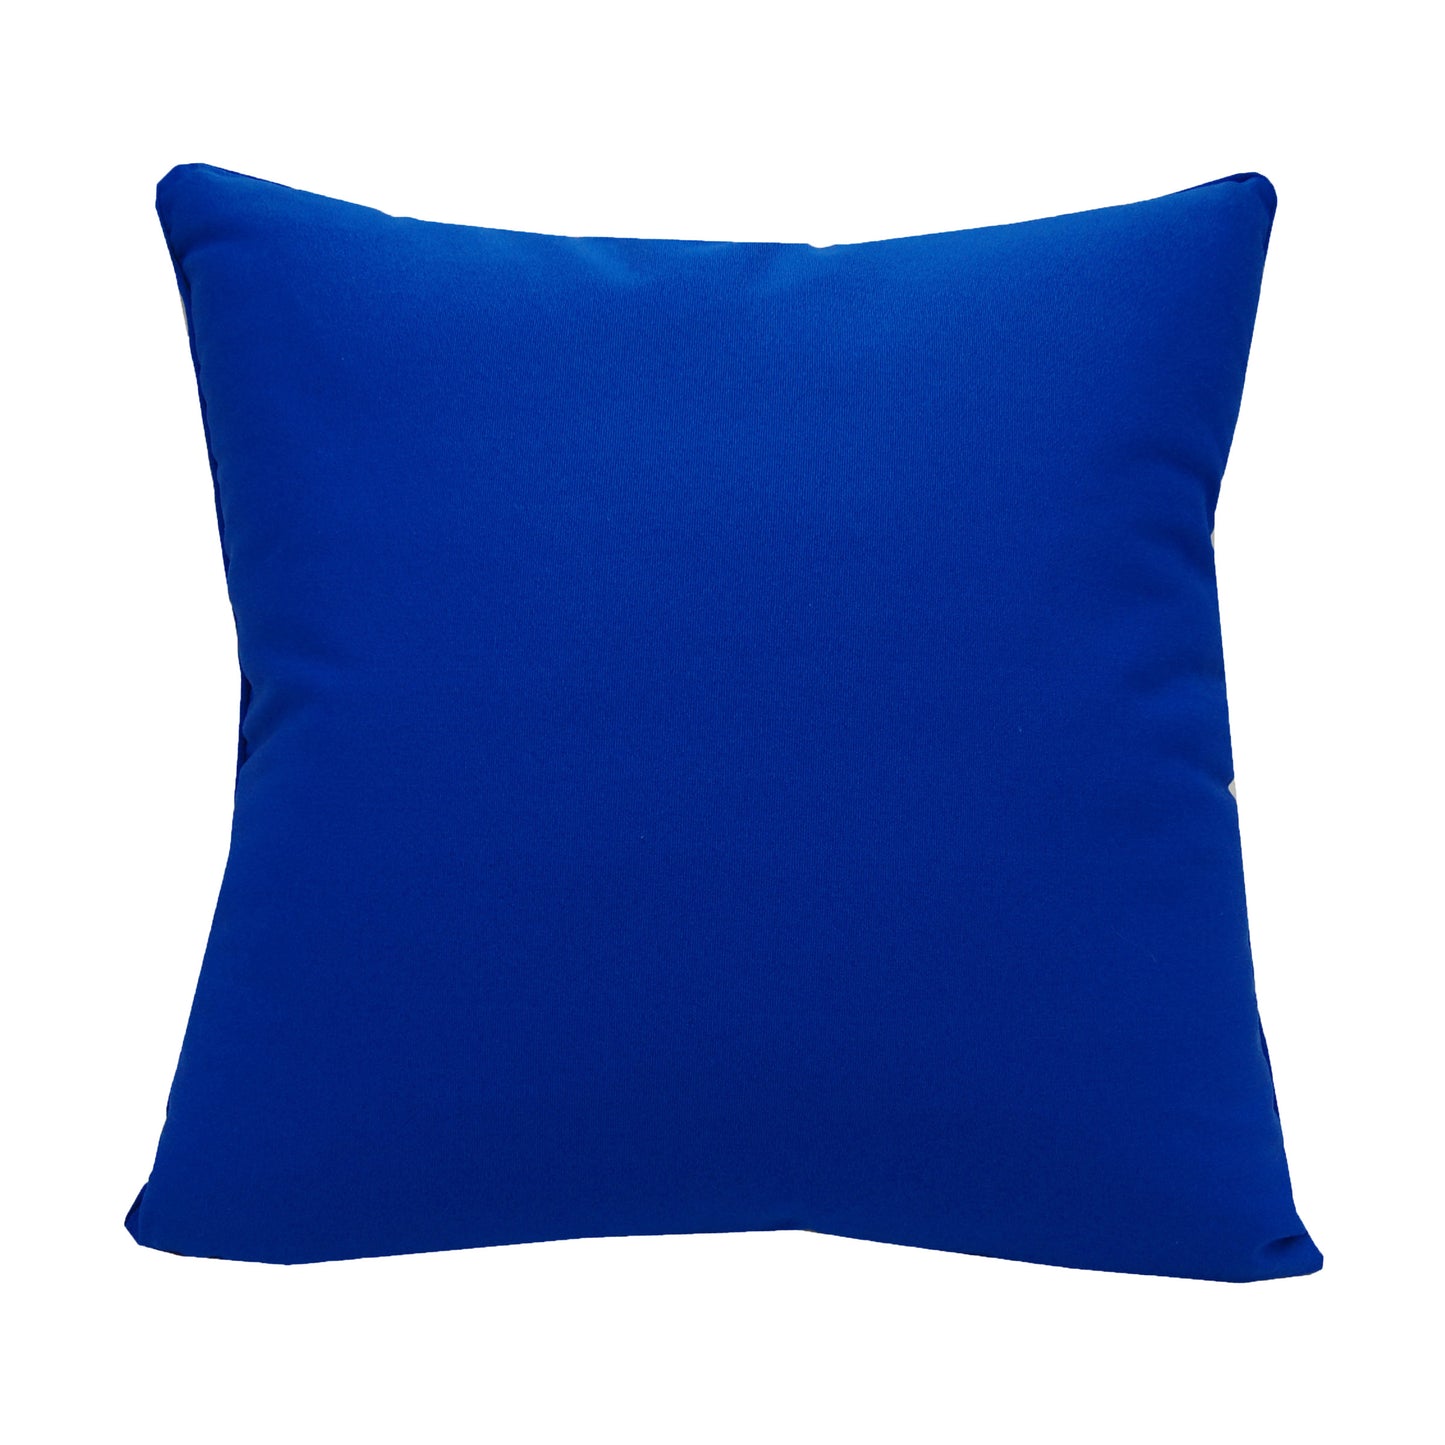 Solid blue fabric; back side of Blue Parlor Palm outdoor pillow.